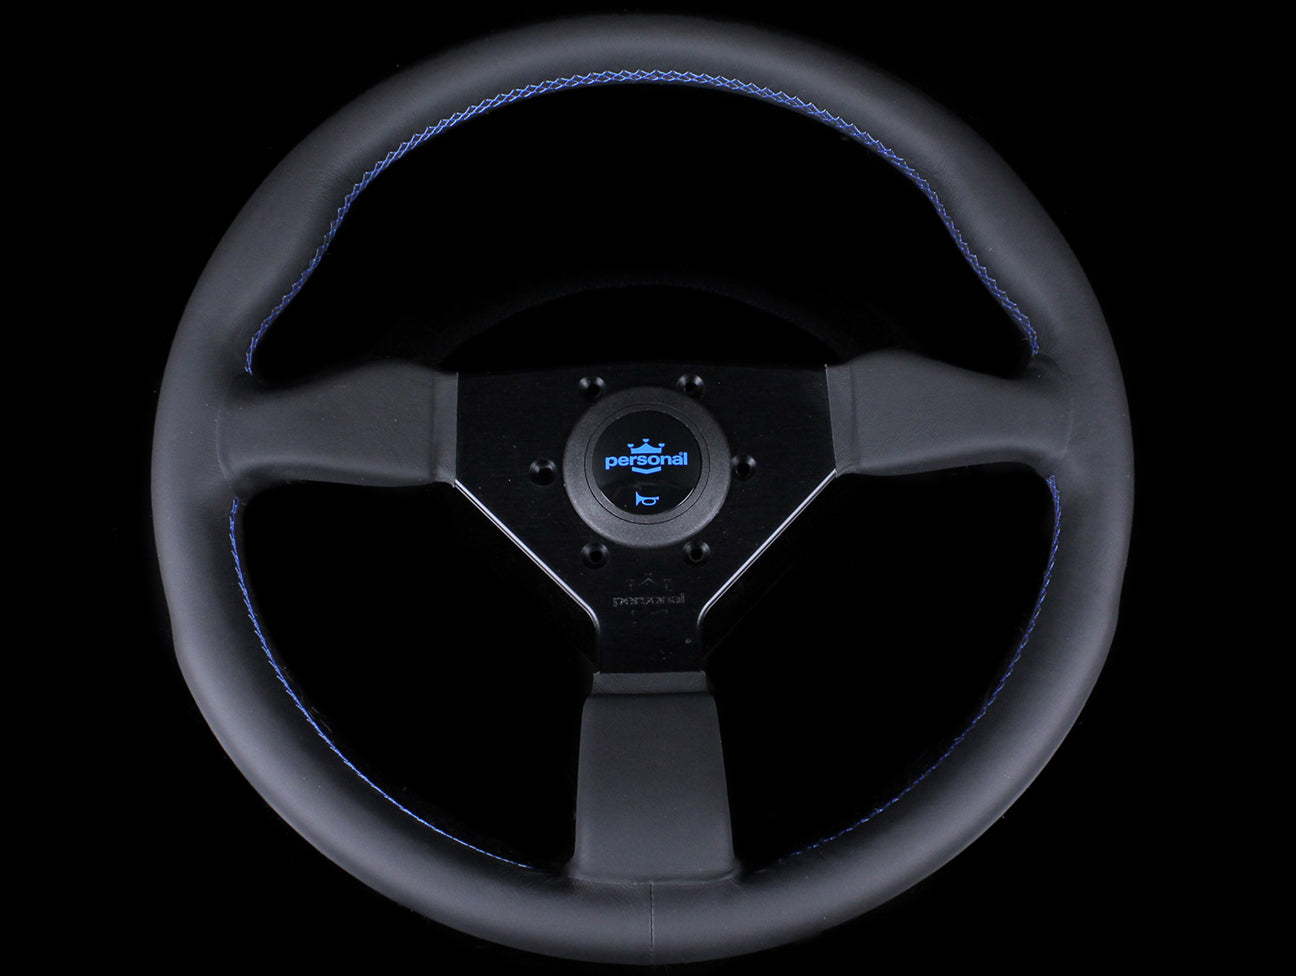 Personal Neo Grinta 350mm Steering Wheel - Black Leather / Blue Stitch